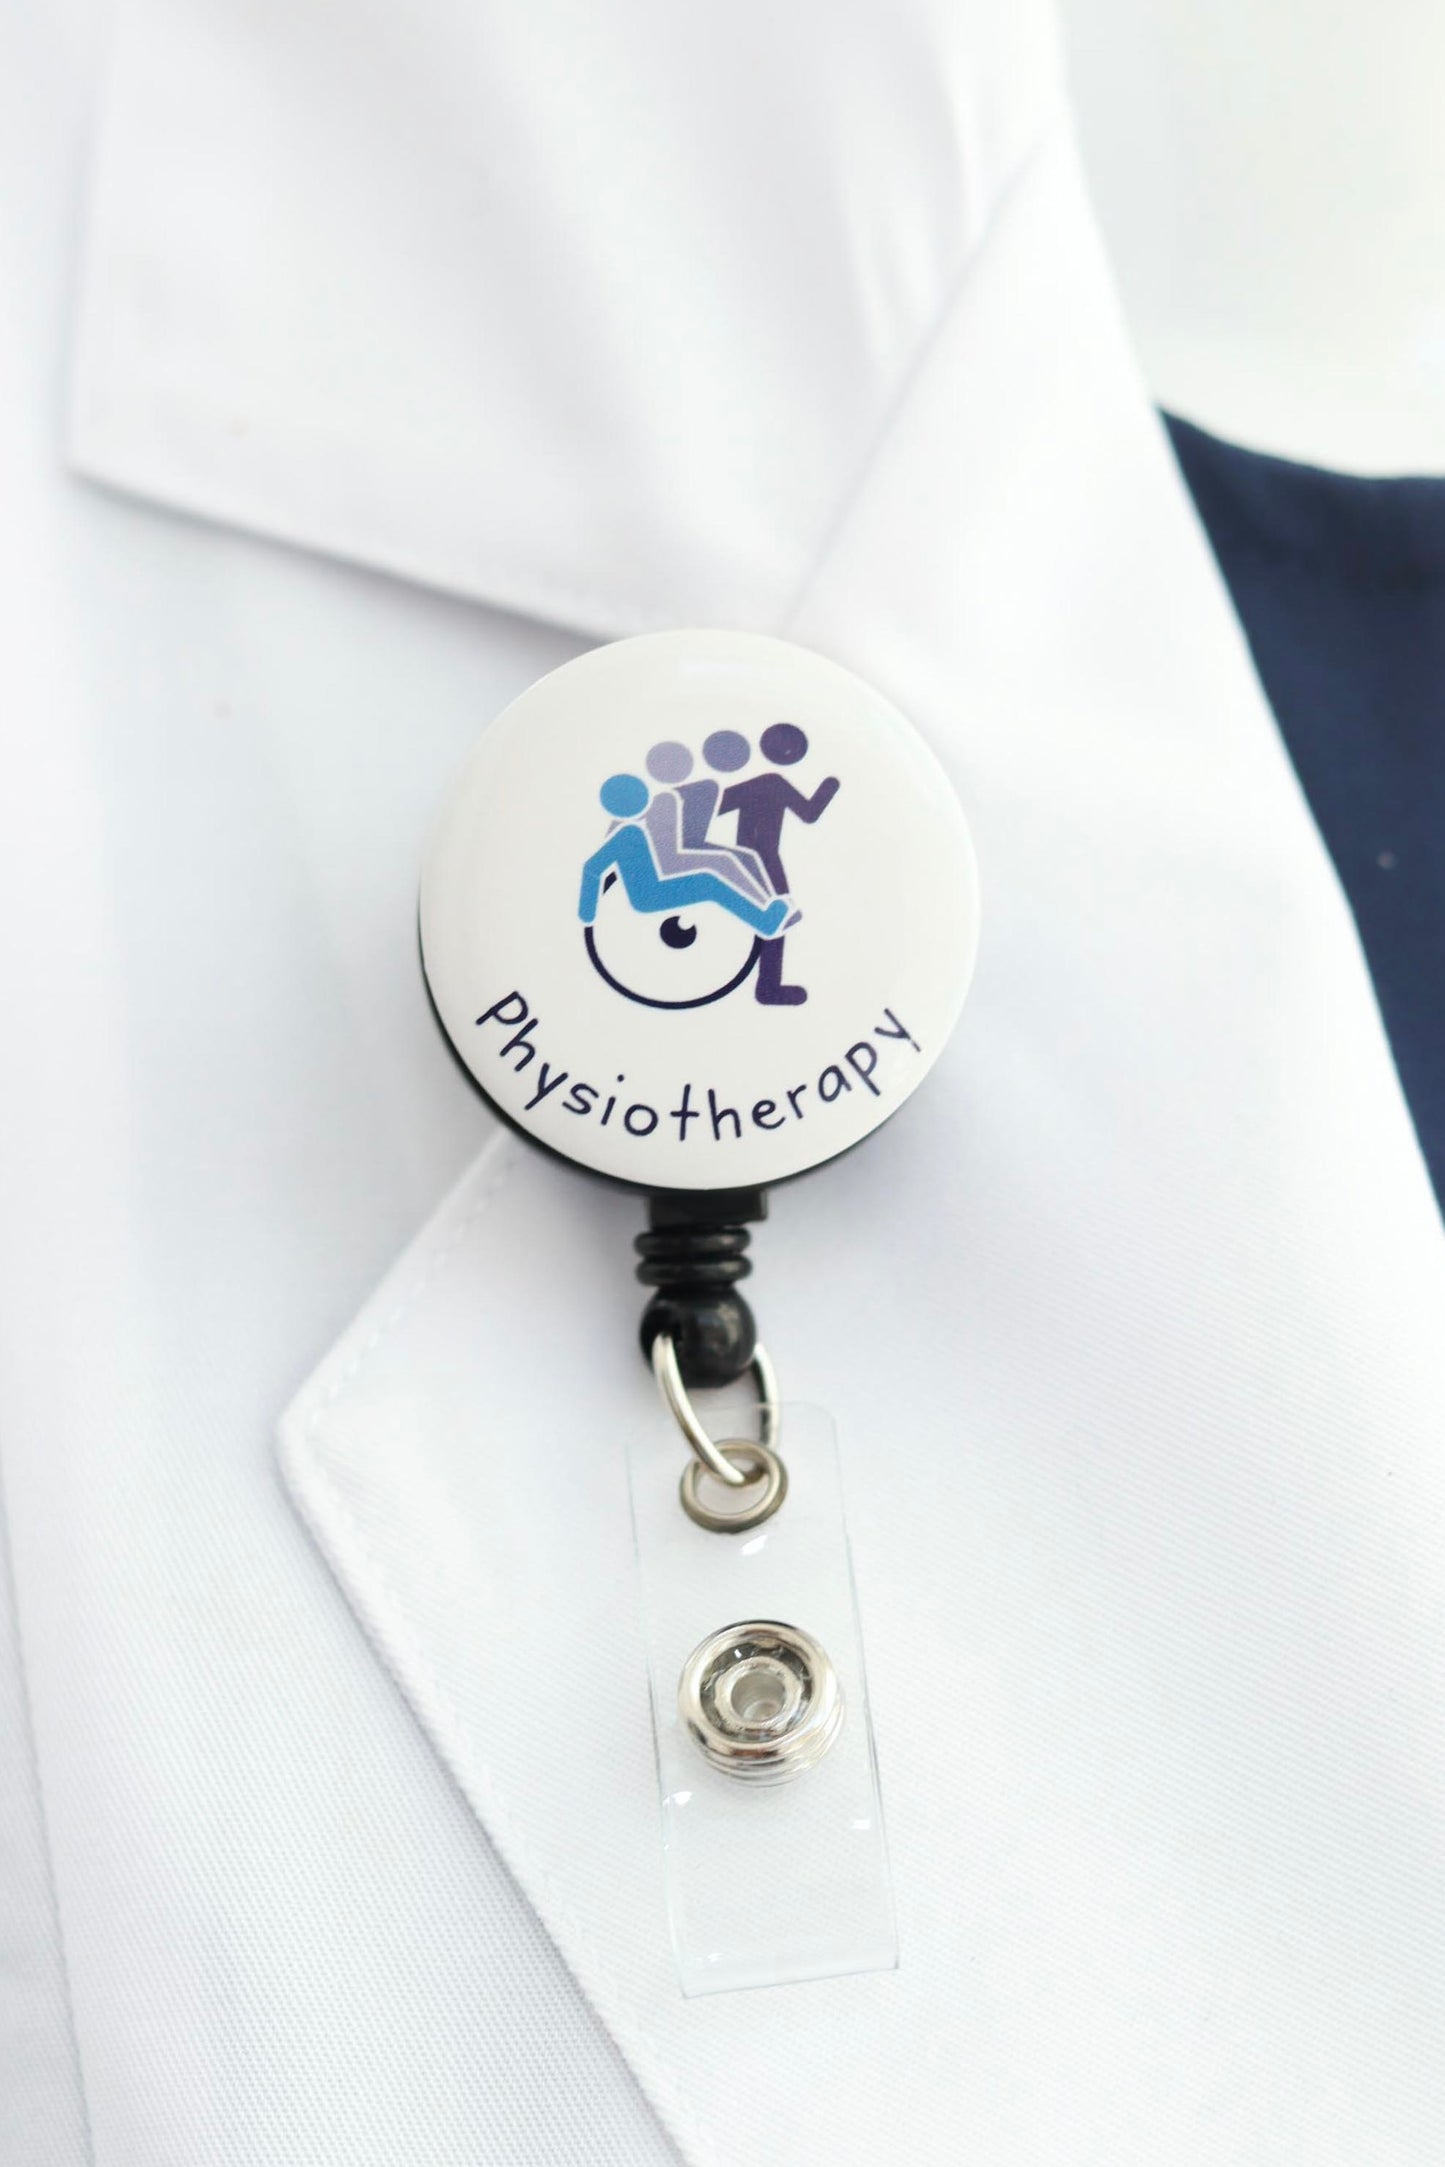 Physiotherapy ID Badge